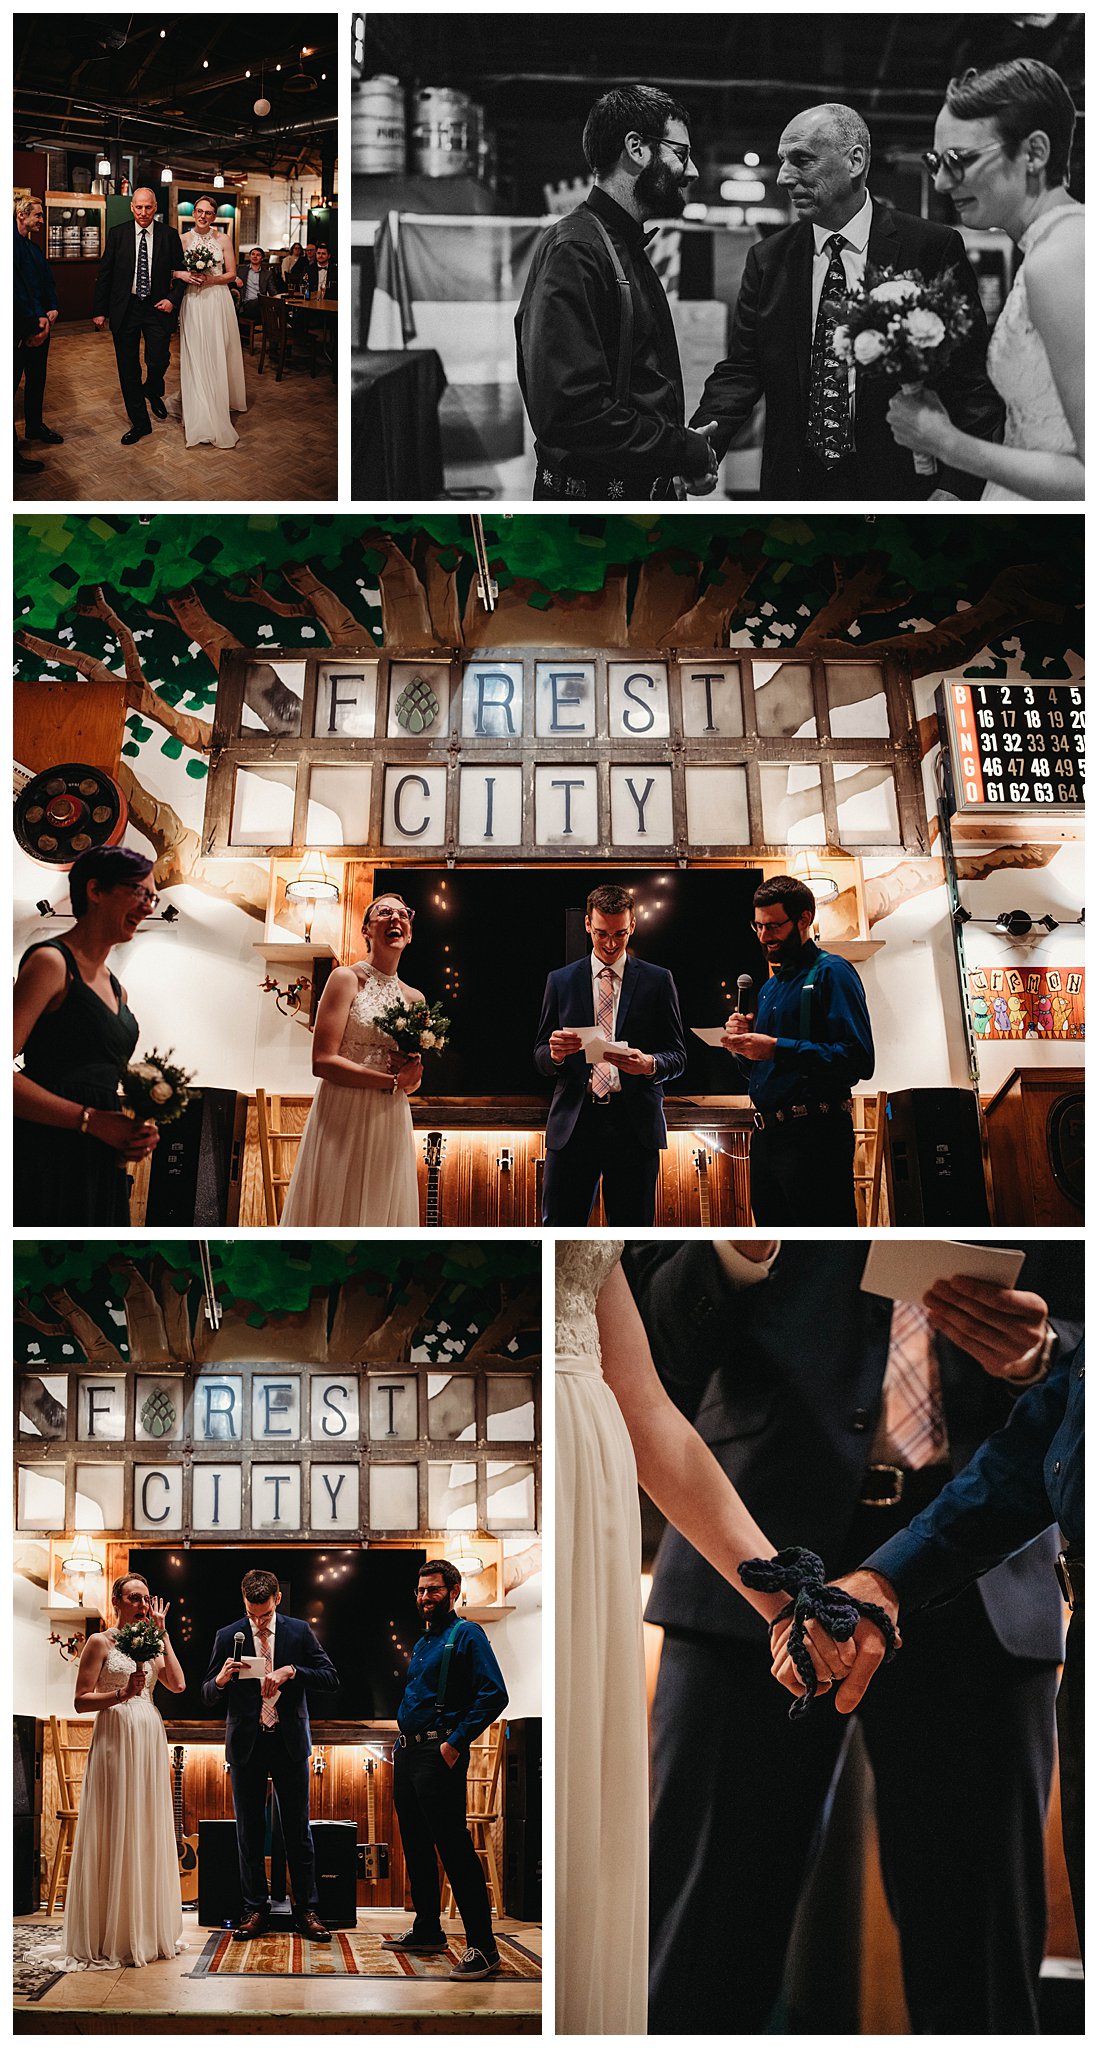 Forest City Brewery Cleveland Wedding Ceremony.